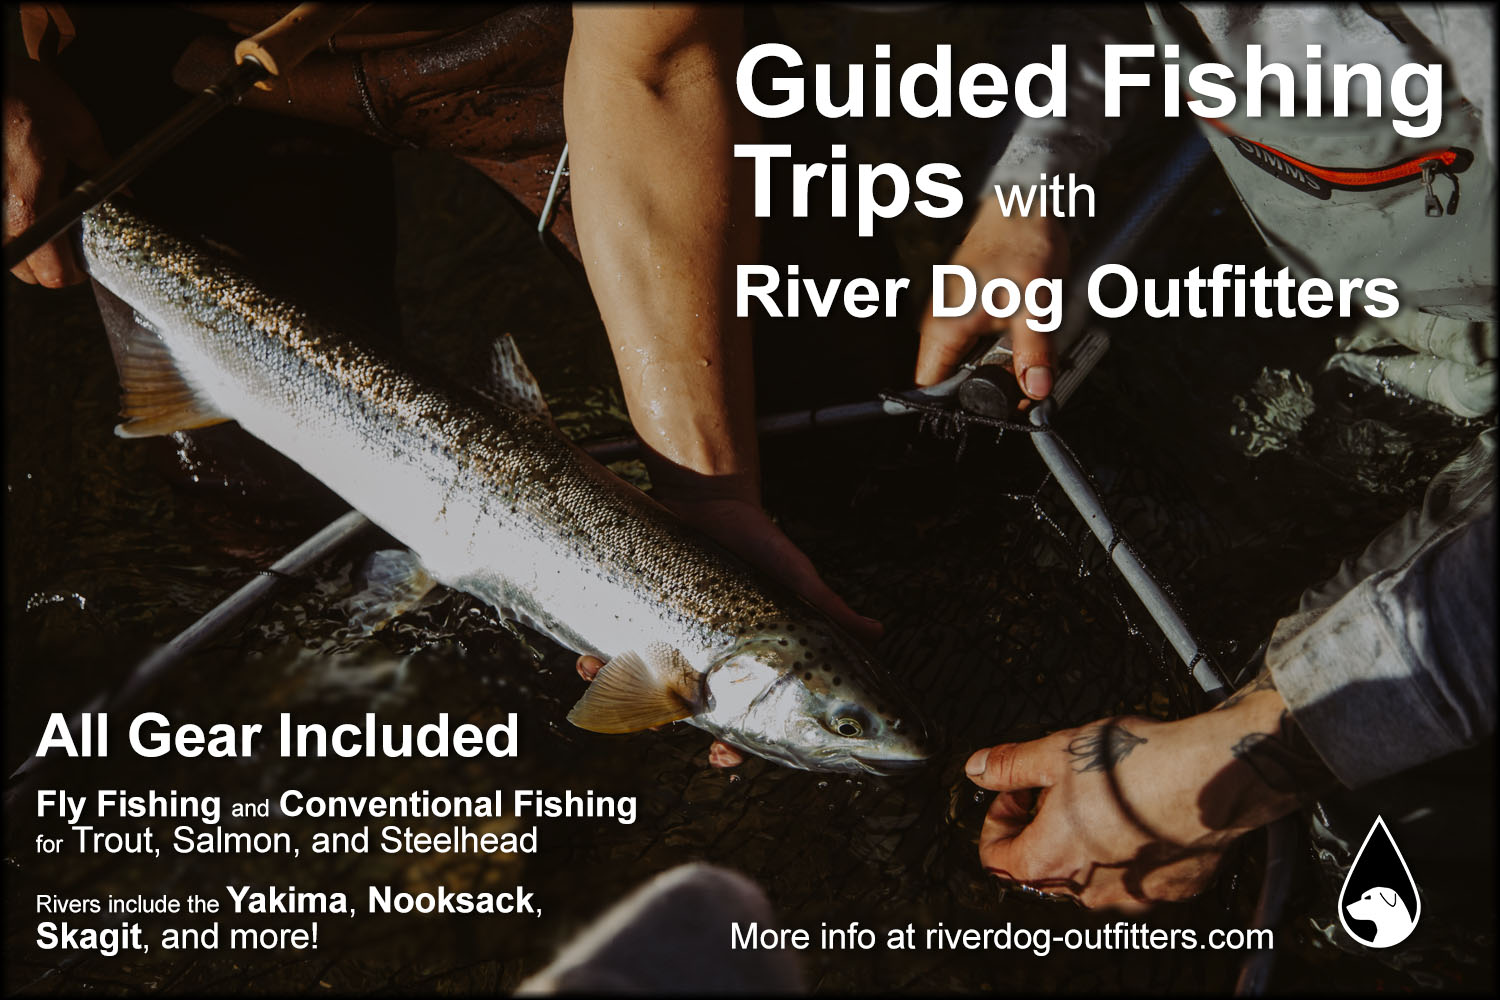 http://riverdog-outfitters.com/wp-content/uploads/2021/01/guided-fishing-trips-ad.jpg